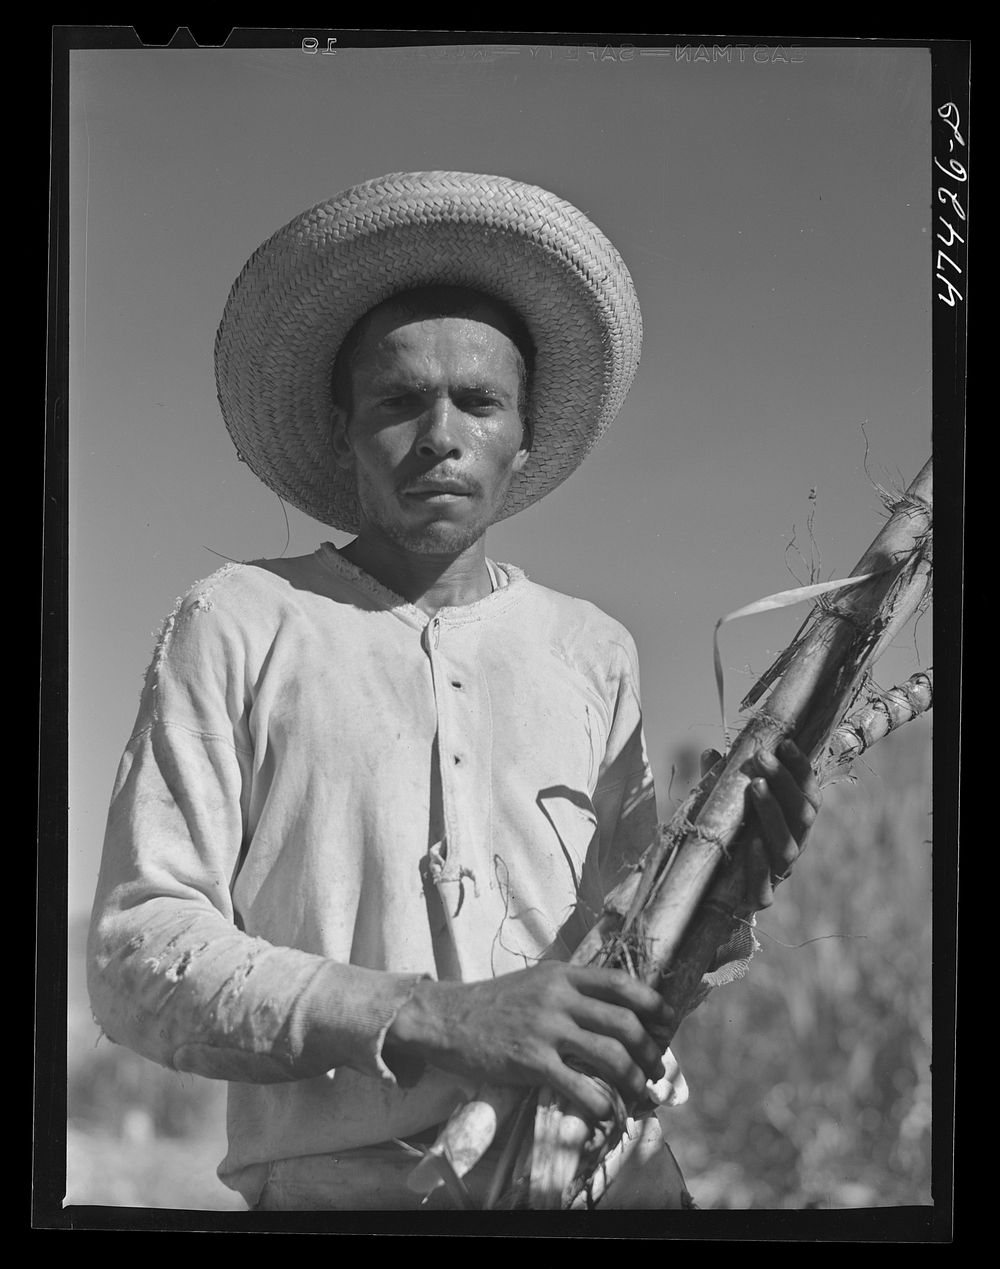 Guanica, Puerto Rico (vicinity). Farm laborer working in a sugar cane field. Sourced from the Library of Congress.